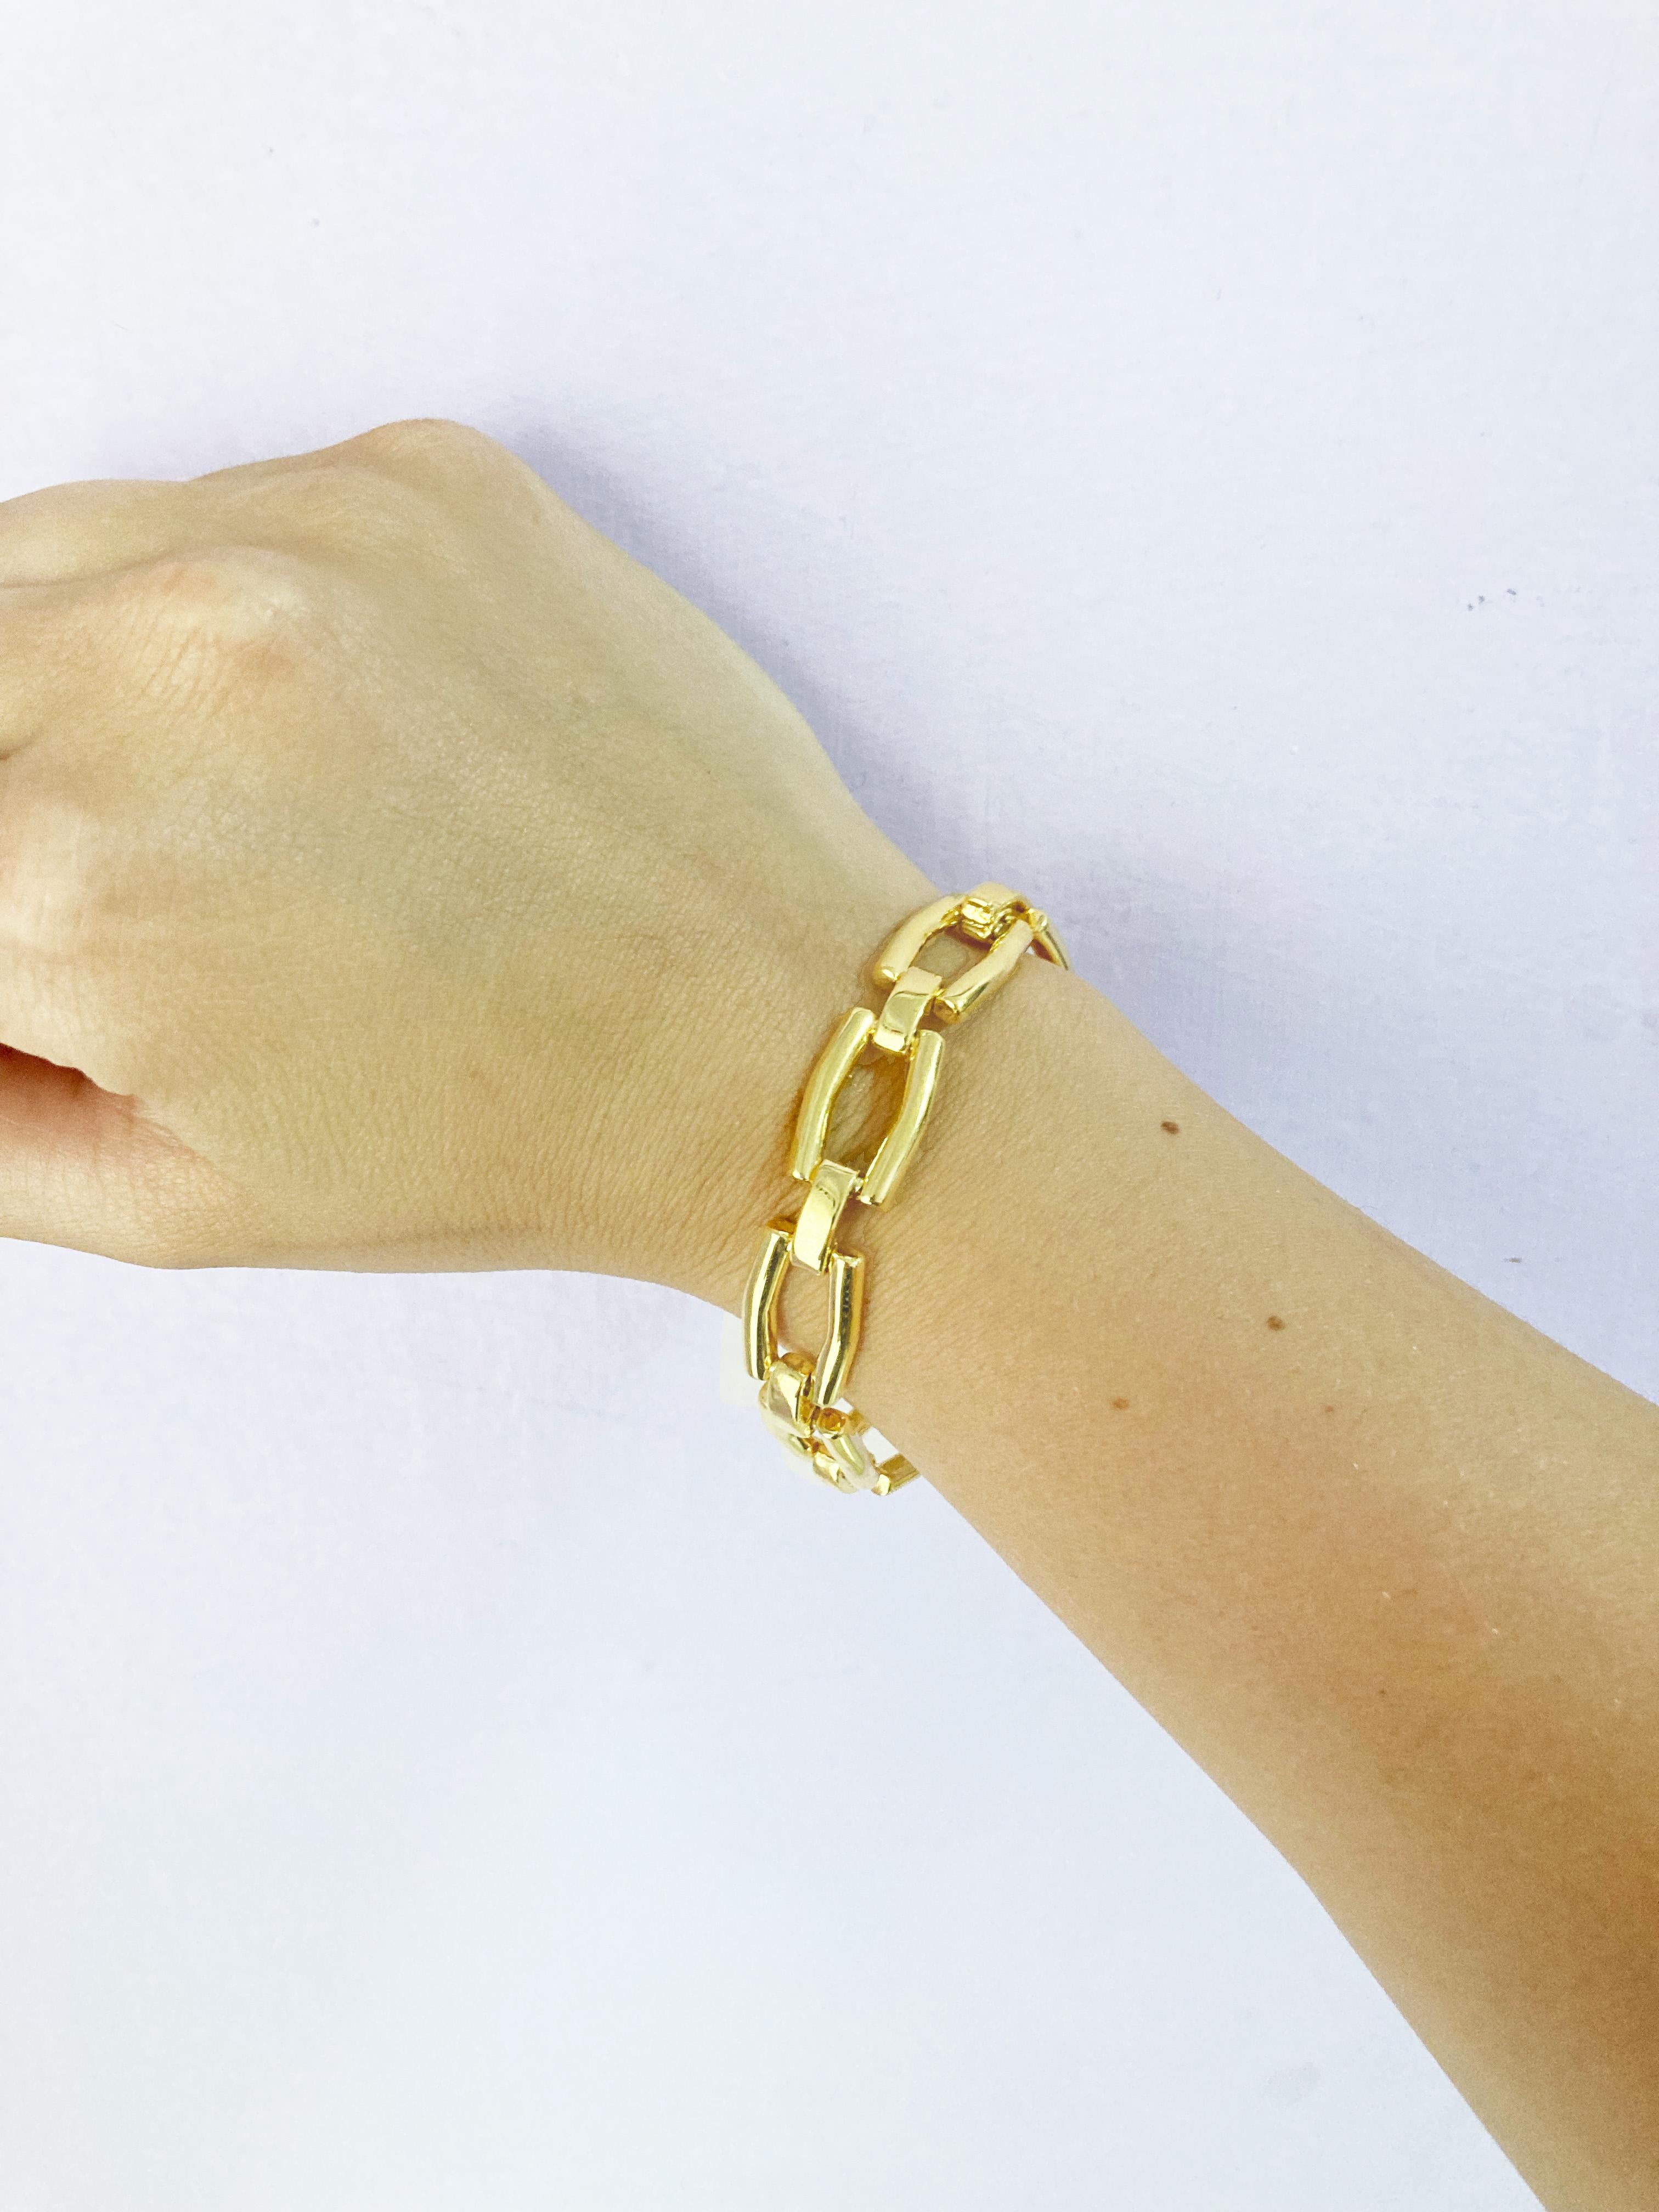 Elevate your style with the exquisite Rossella Ugolini Italian Design Modern Bracelet, a manifestation of contemporary luxury in Silver Sterling 24K Yellow Gold plated . Meticulously handcrafted, this bracelet features eight rectangular handmade